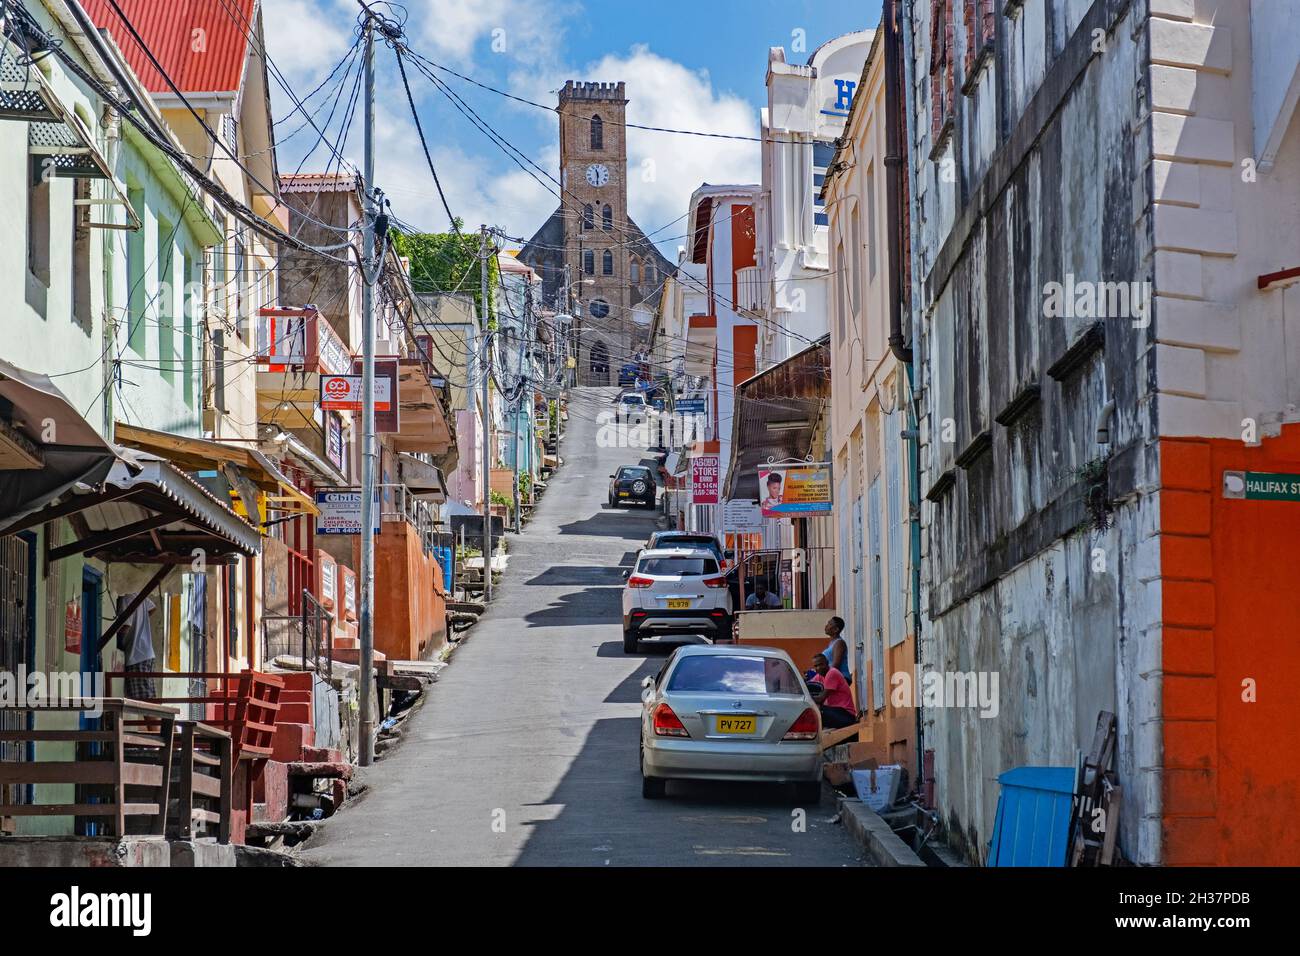 Street with shops and the Roman Catholic Cathedral at the capital city St. George's on the west coast of the island of Grenada, Caribbean Stock Photo